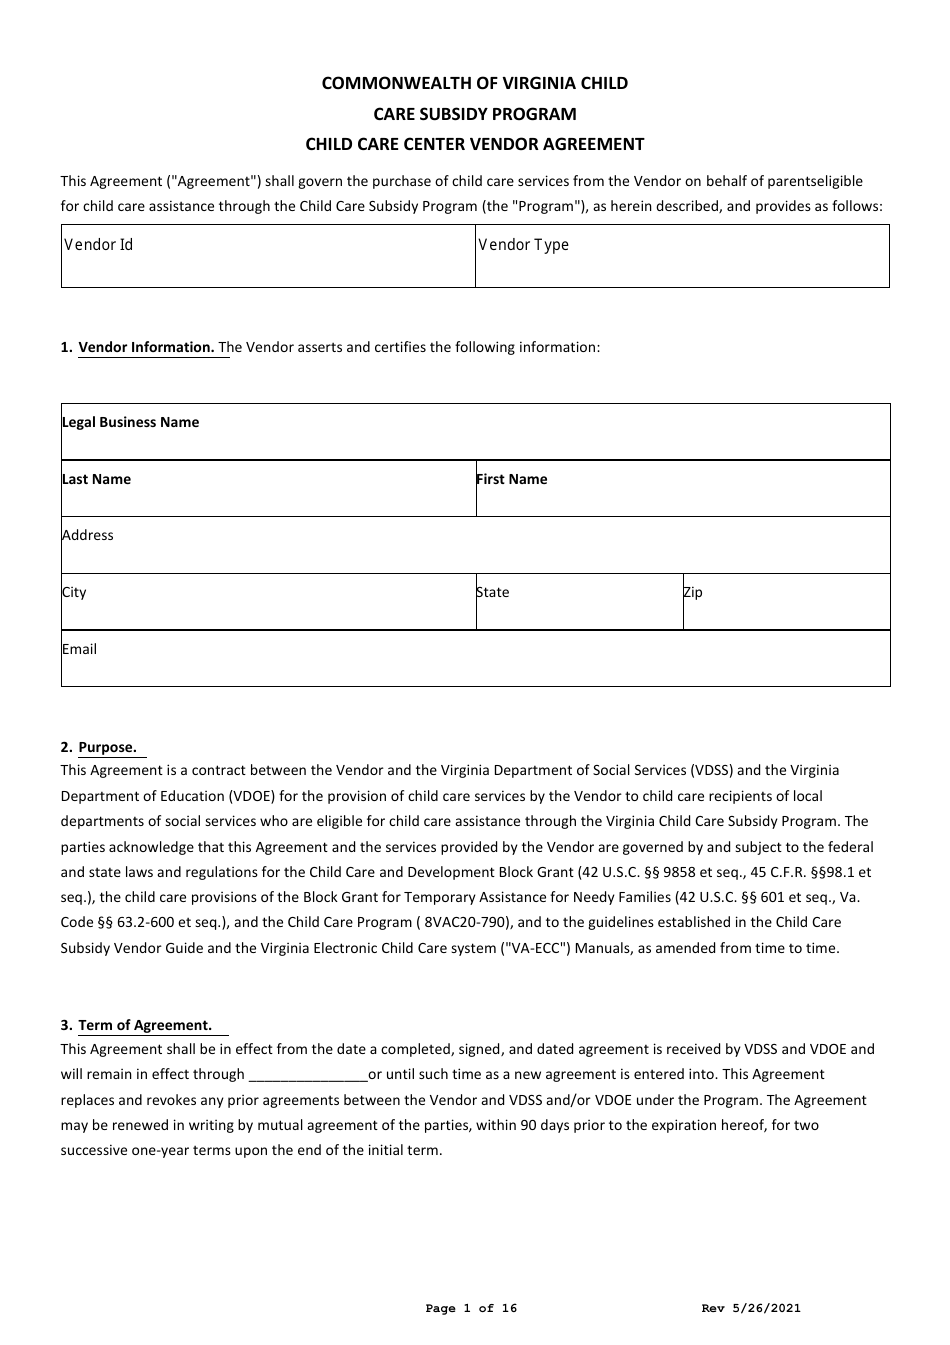 Child Care Center Vendor Agreement - Child Care Subsidy Program - Virginia, Page 1